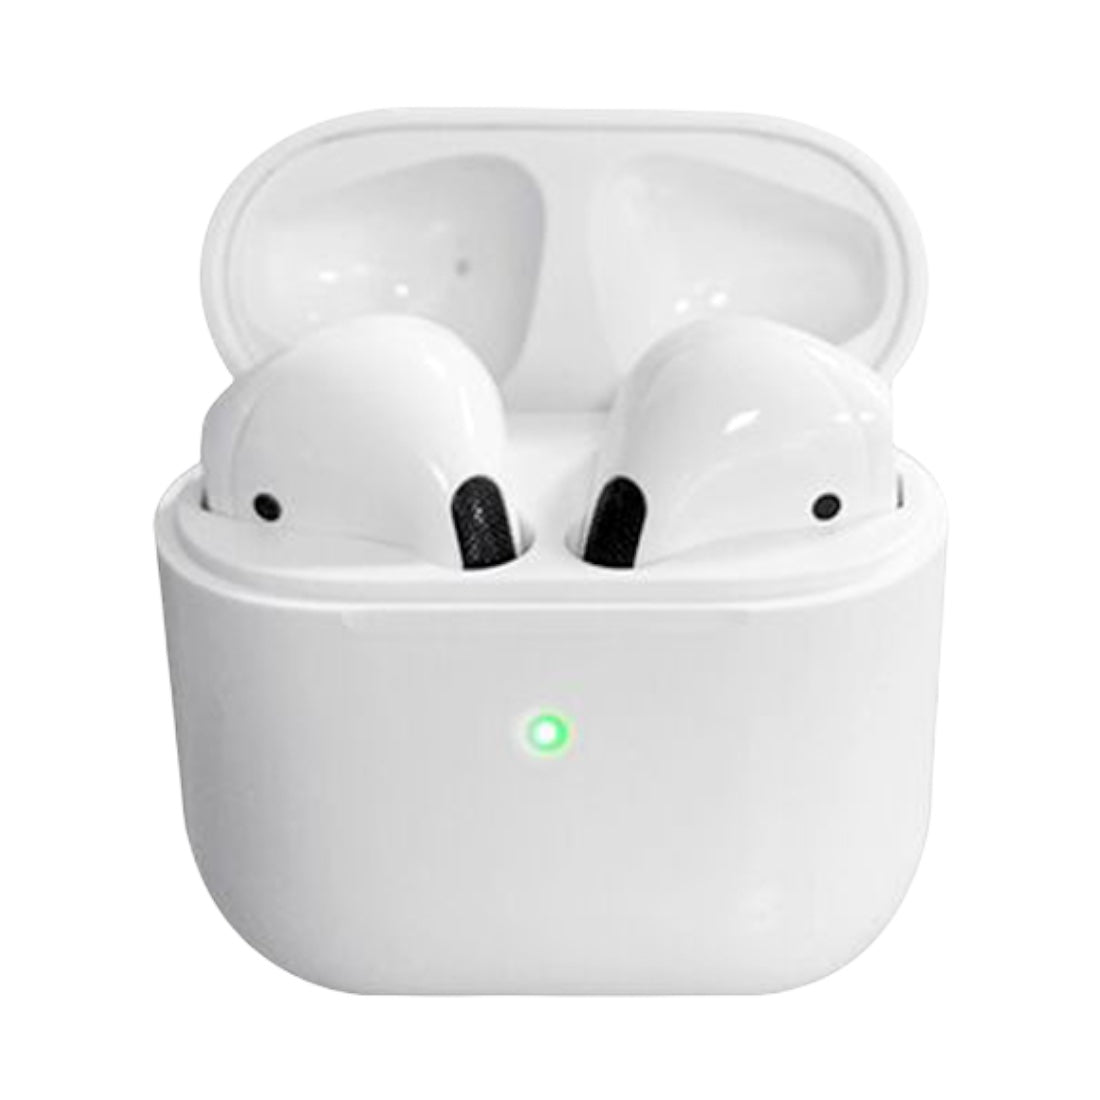 ROTERO In-Ear Bluetooth Stereo AirPods